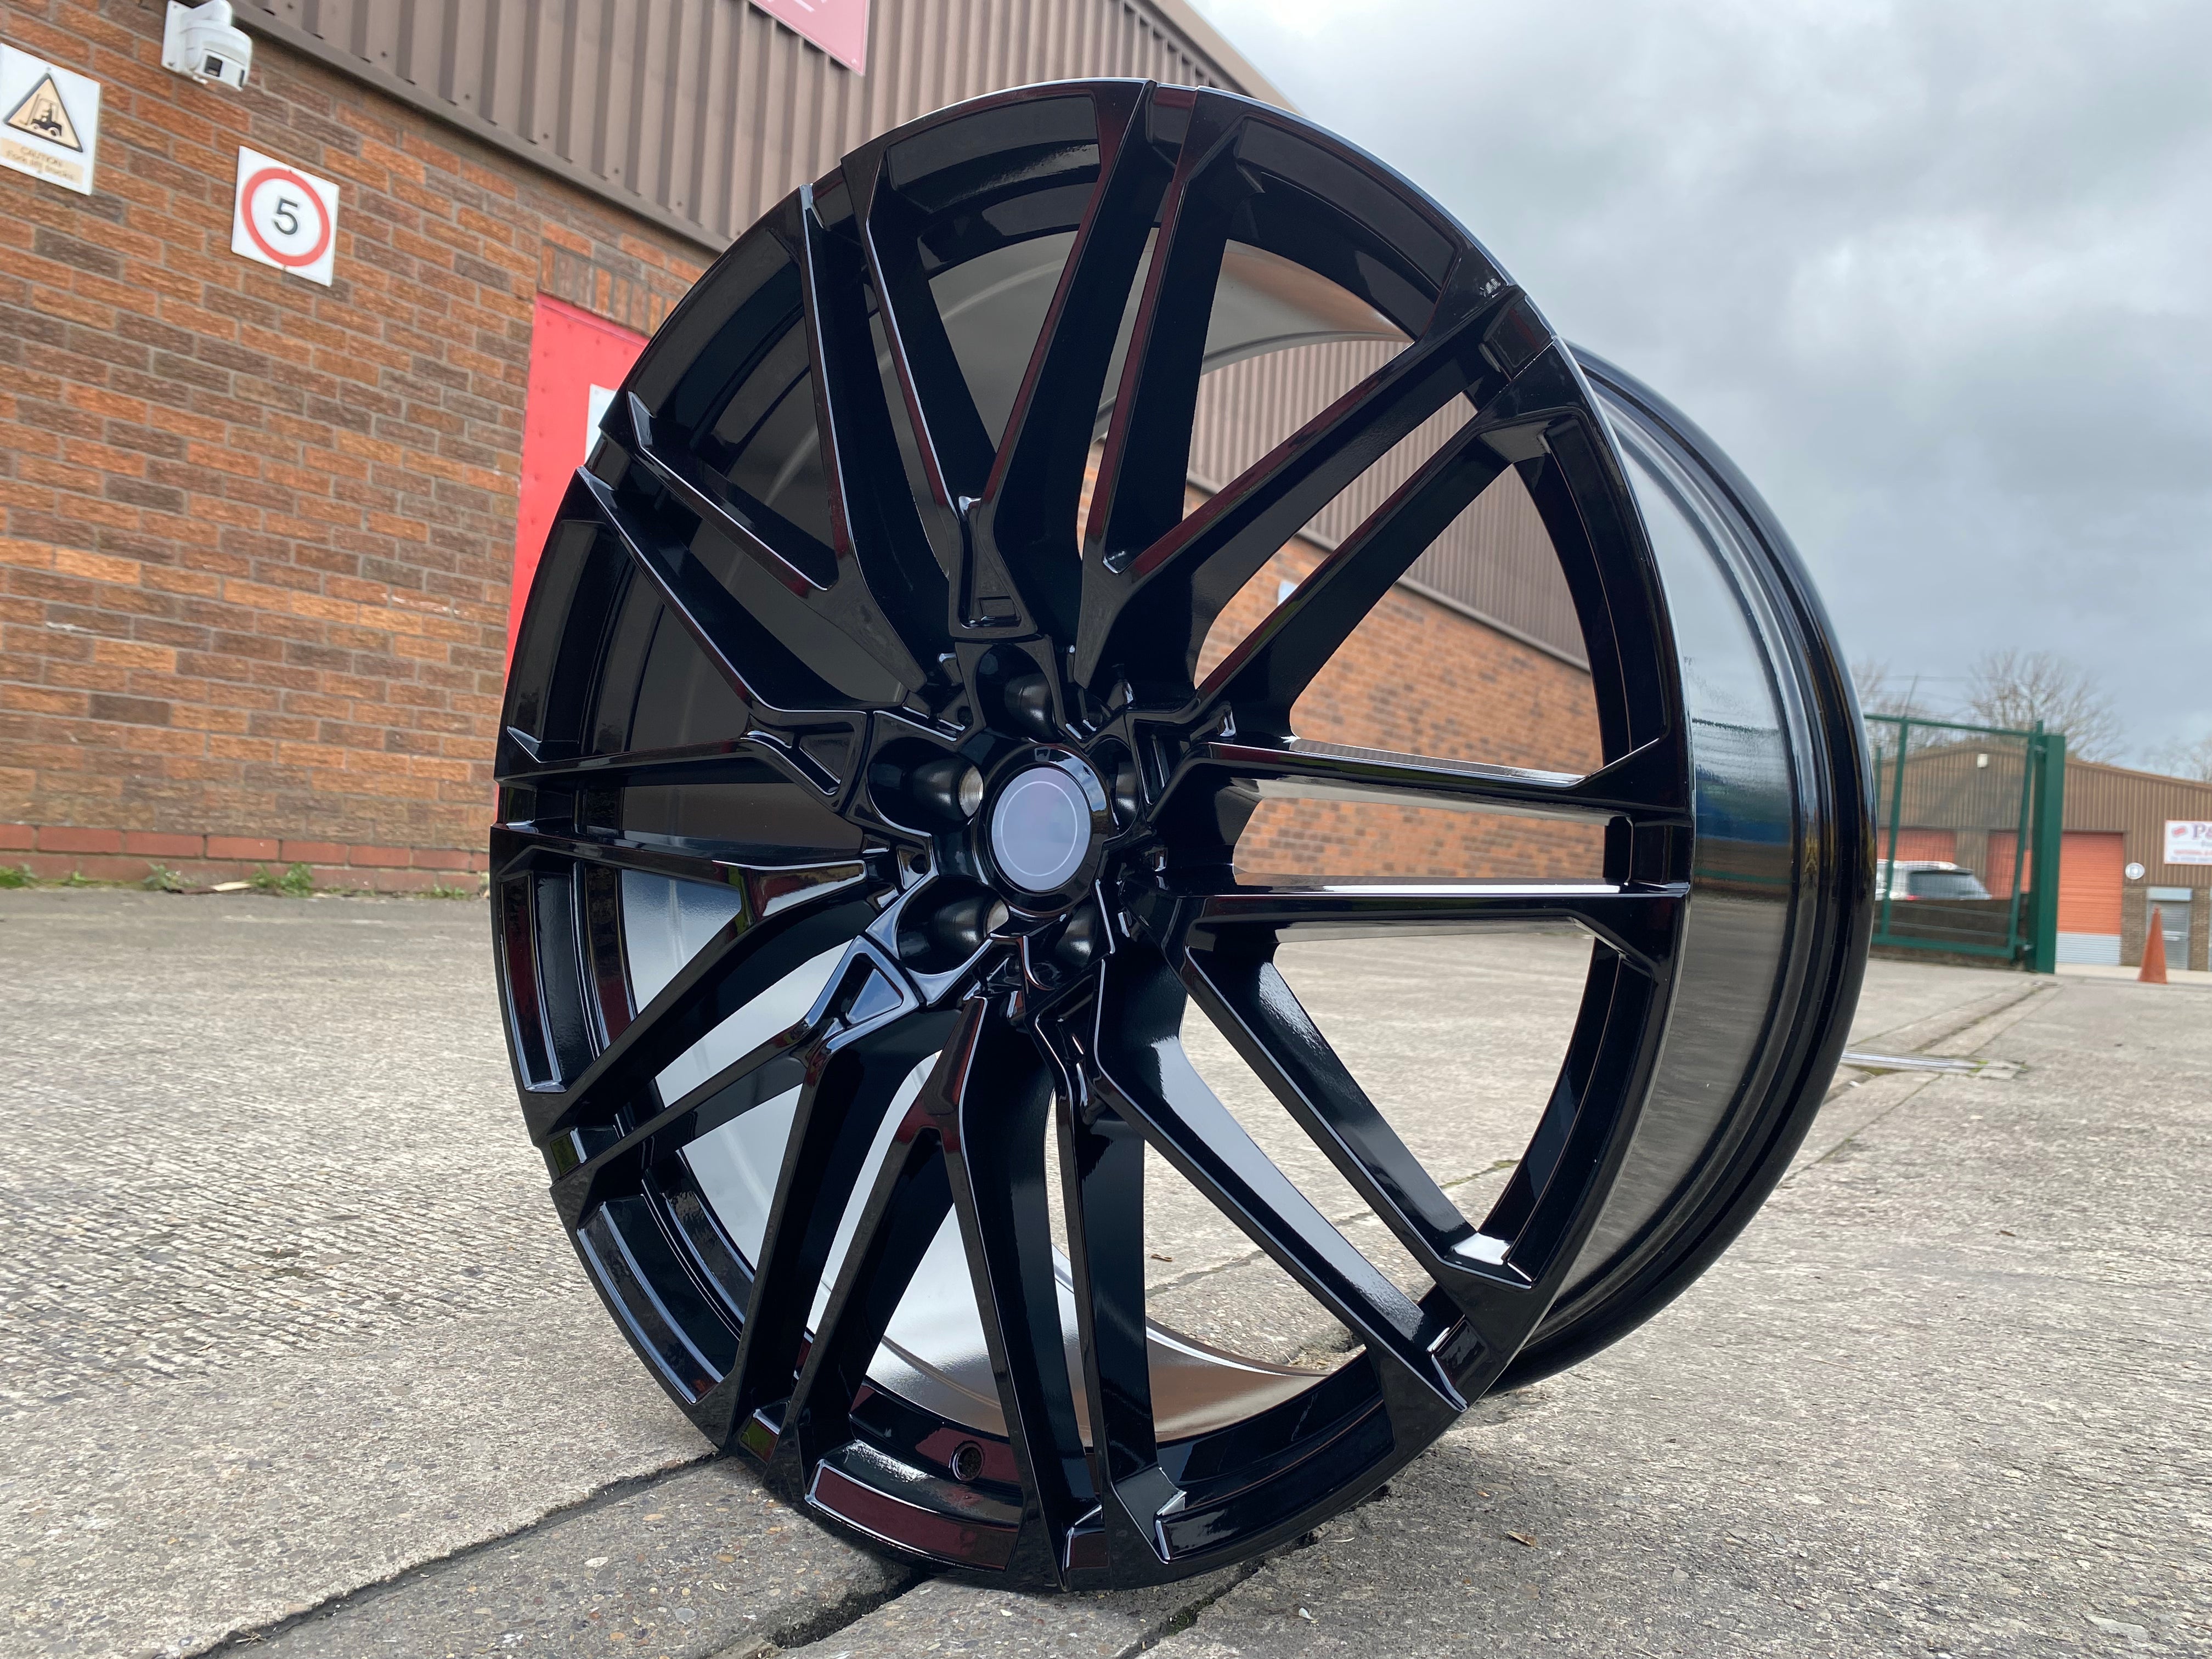 22" X5 Comp Style wheels fits X5 and X6 5X112 G-series 2018-0nwards Staggered 9.5-10.5J